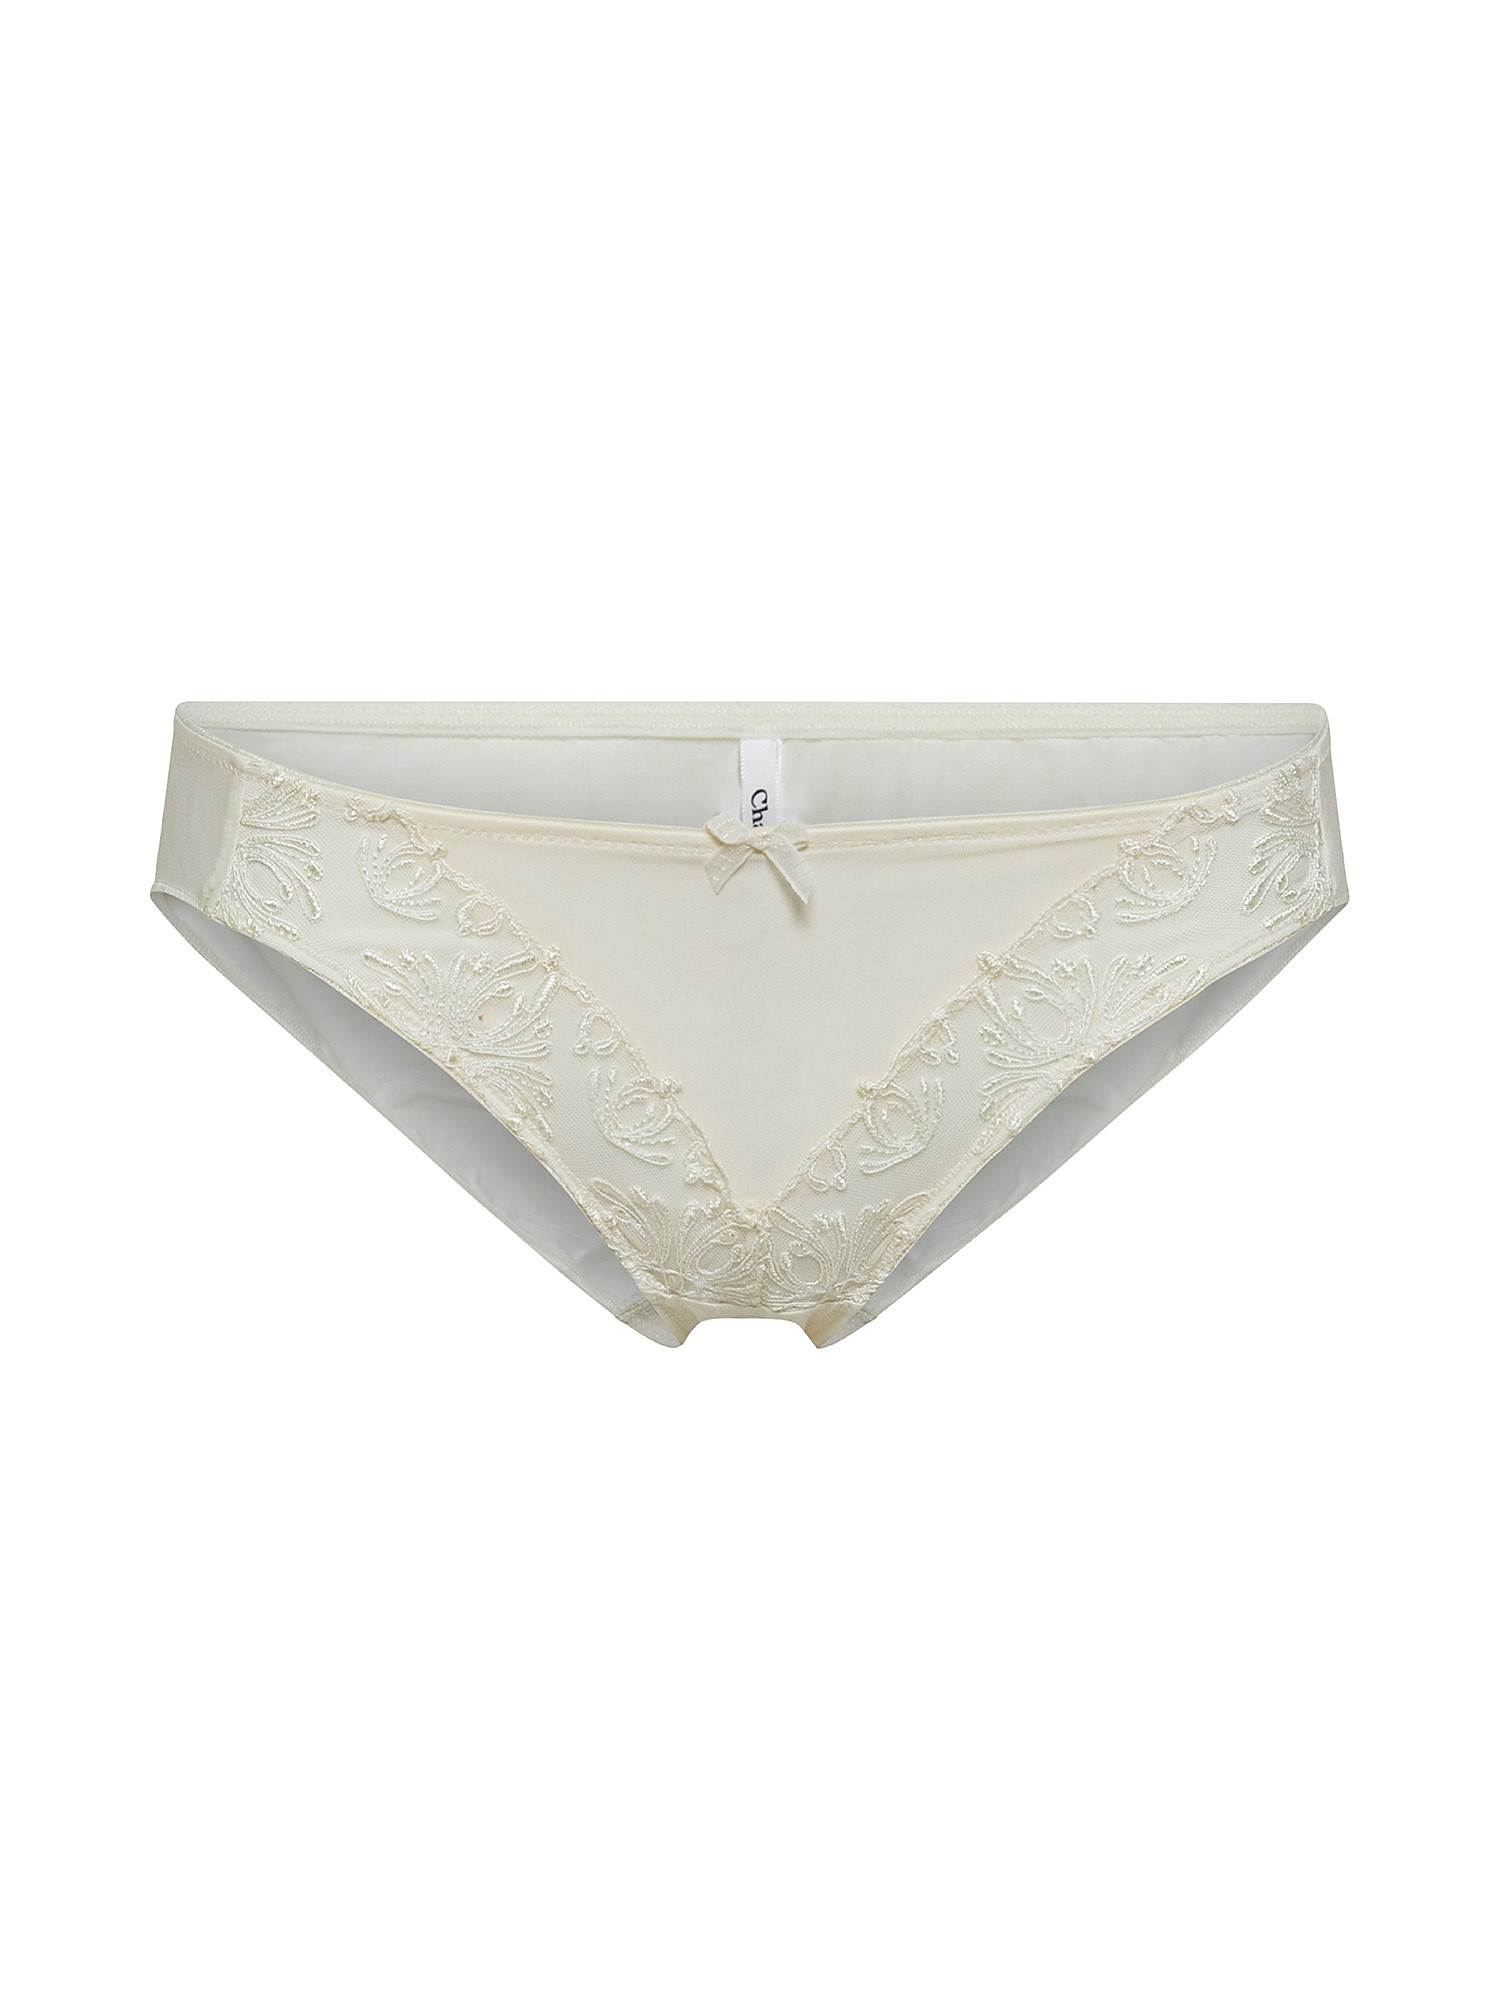 Briefs with embroidery, White Ivory, large image number 0